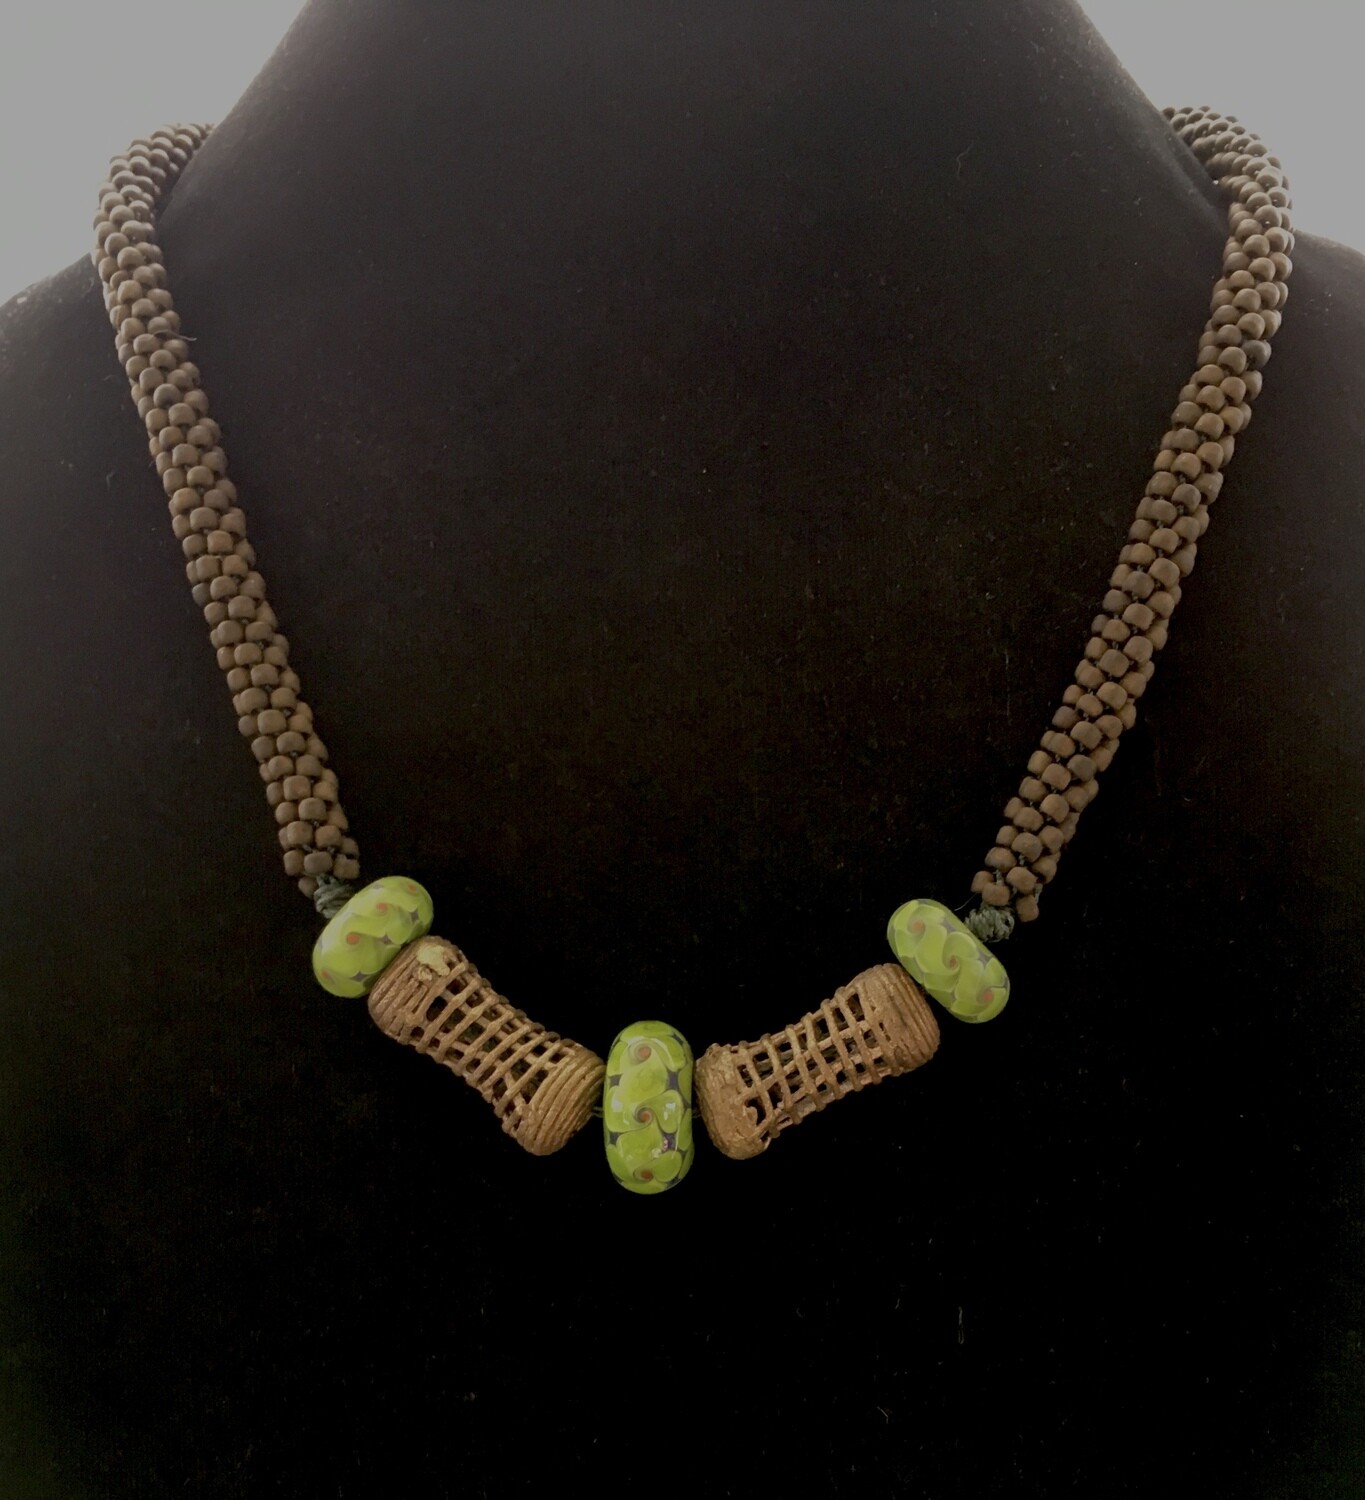 Kumihumo necklace with ethnic bronze and hand made glass beads